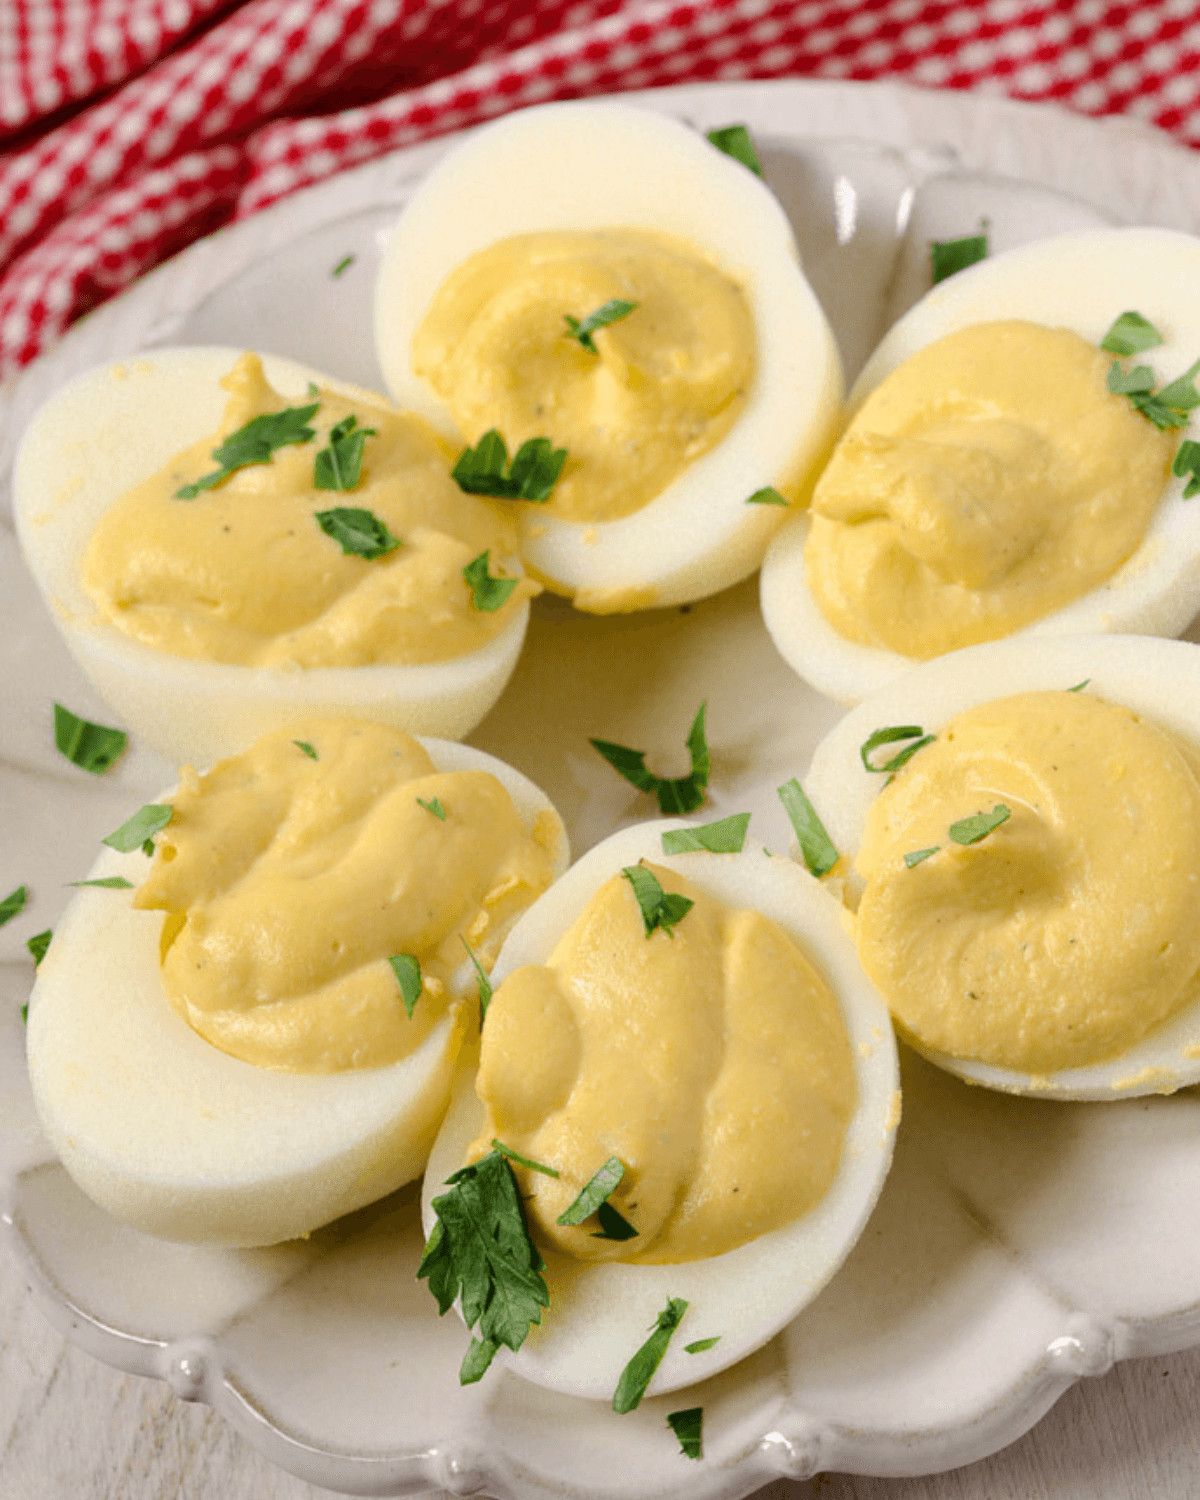 A plate of fancy deviled eggs garnished with fresh parsley.